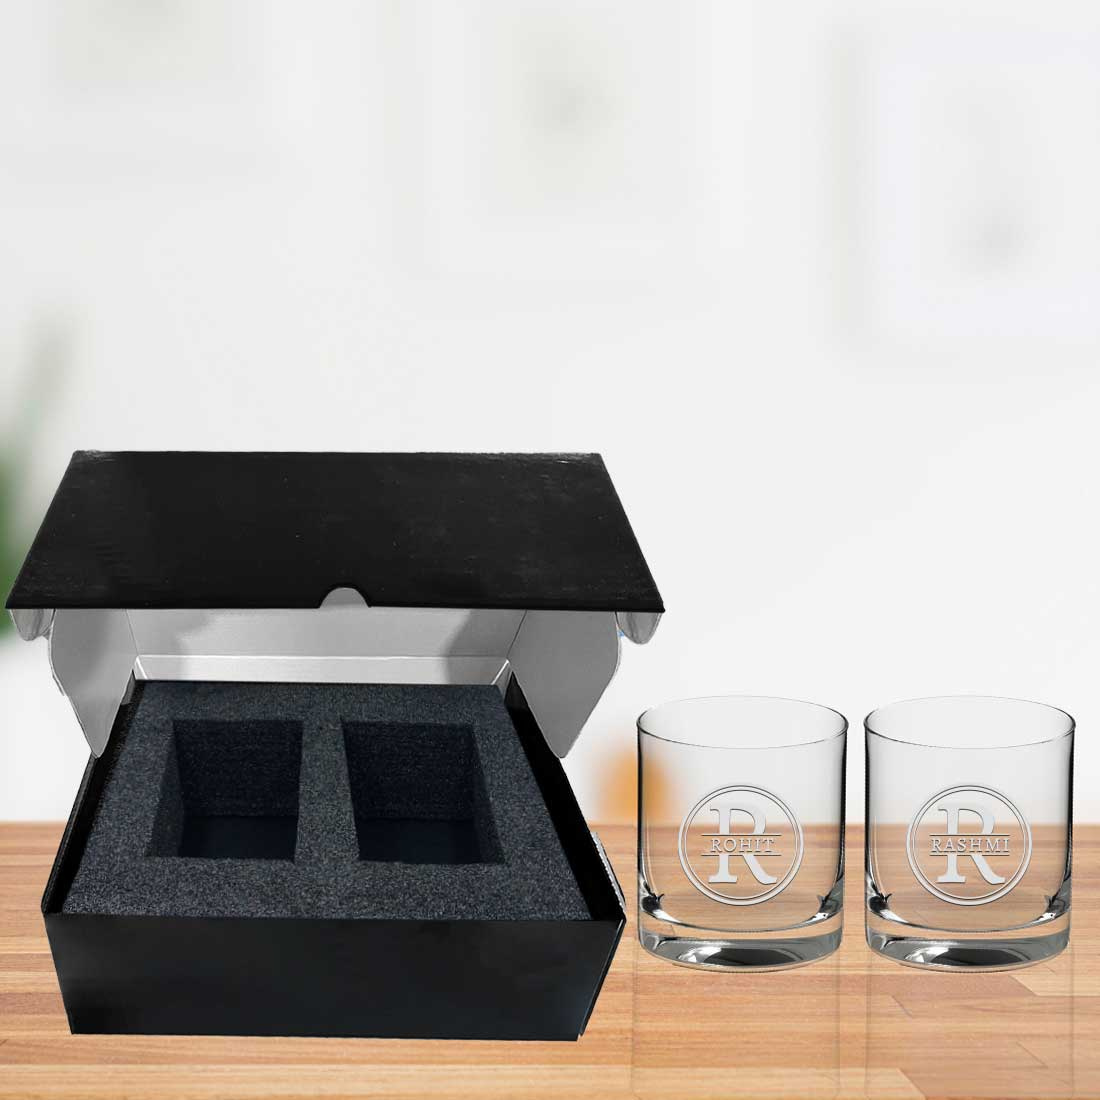 Personalized Gift Set for Him with 2 Whiskey Glasses -Perfect Present for Husband Boyfriend Boss